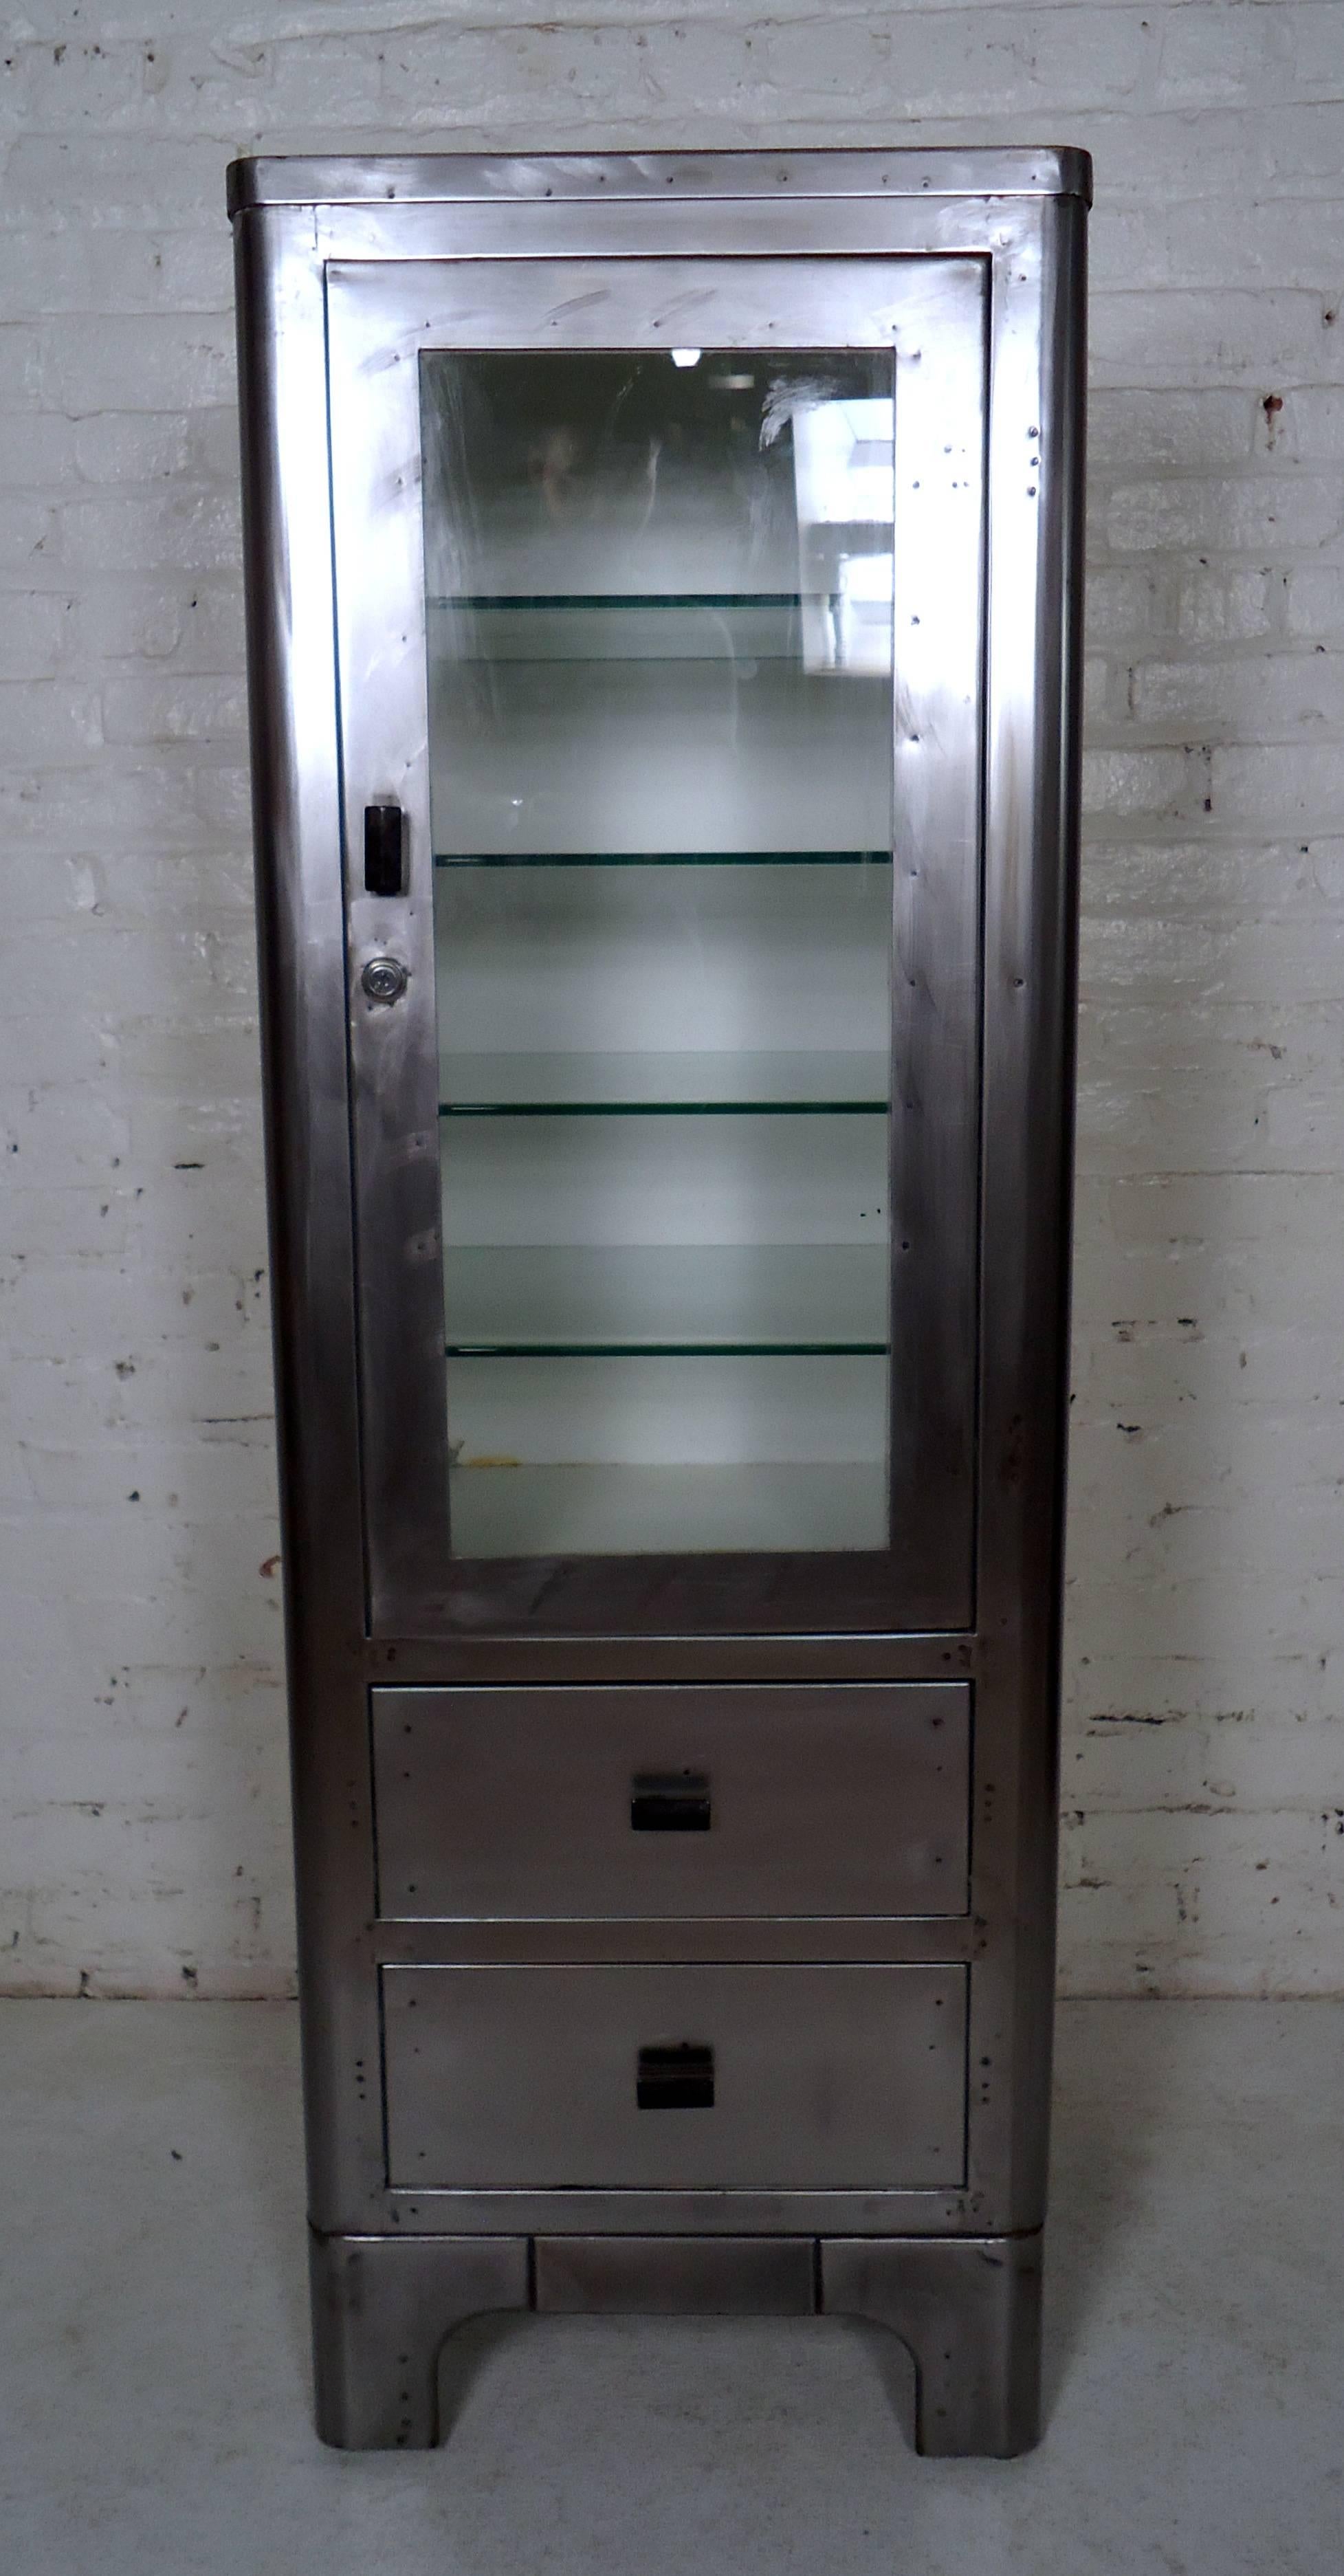 Vintage medical cabinet stripped to bare metal and lacquered for a handsome industrial look. Two lower drawers, top cabinet featuring many glass shelves. 

Please confirm item location - NY or NJ - with dealer).